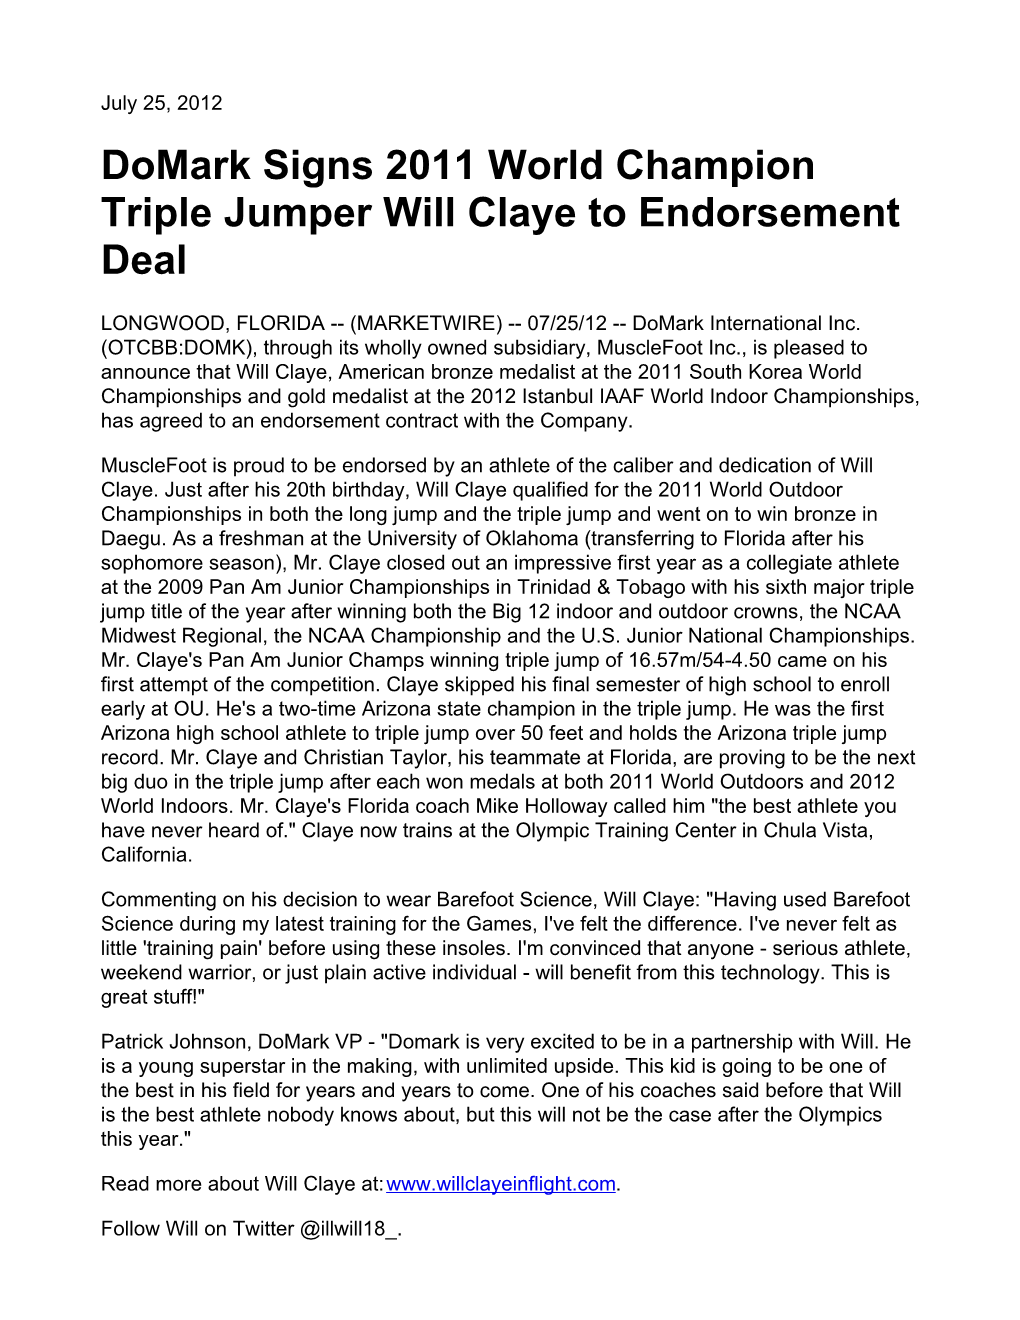 Domark Signs 2011 World Champion Triple Jumper Will Claye to Endorsement Deal